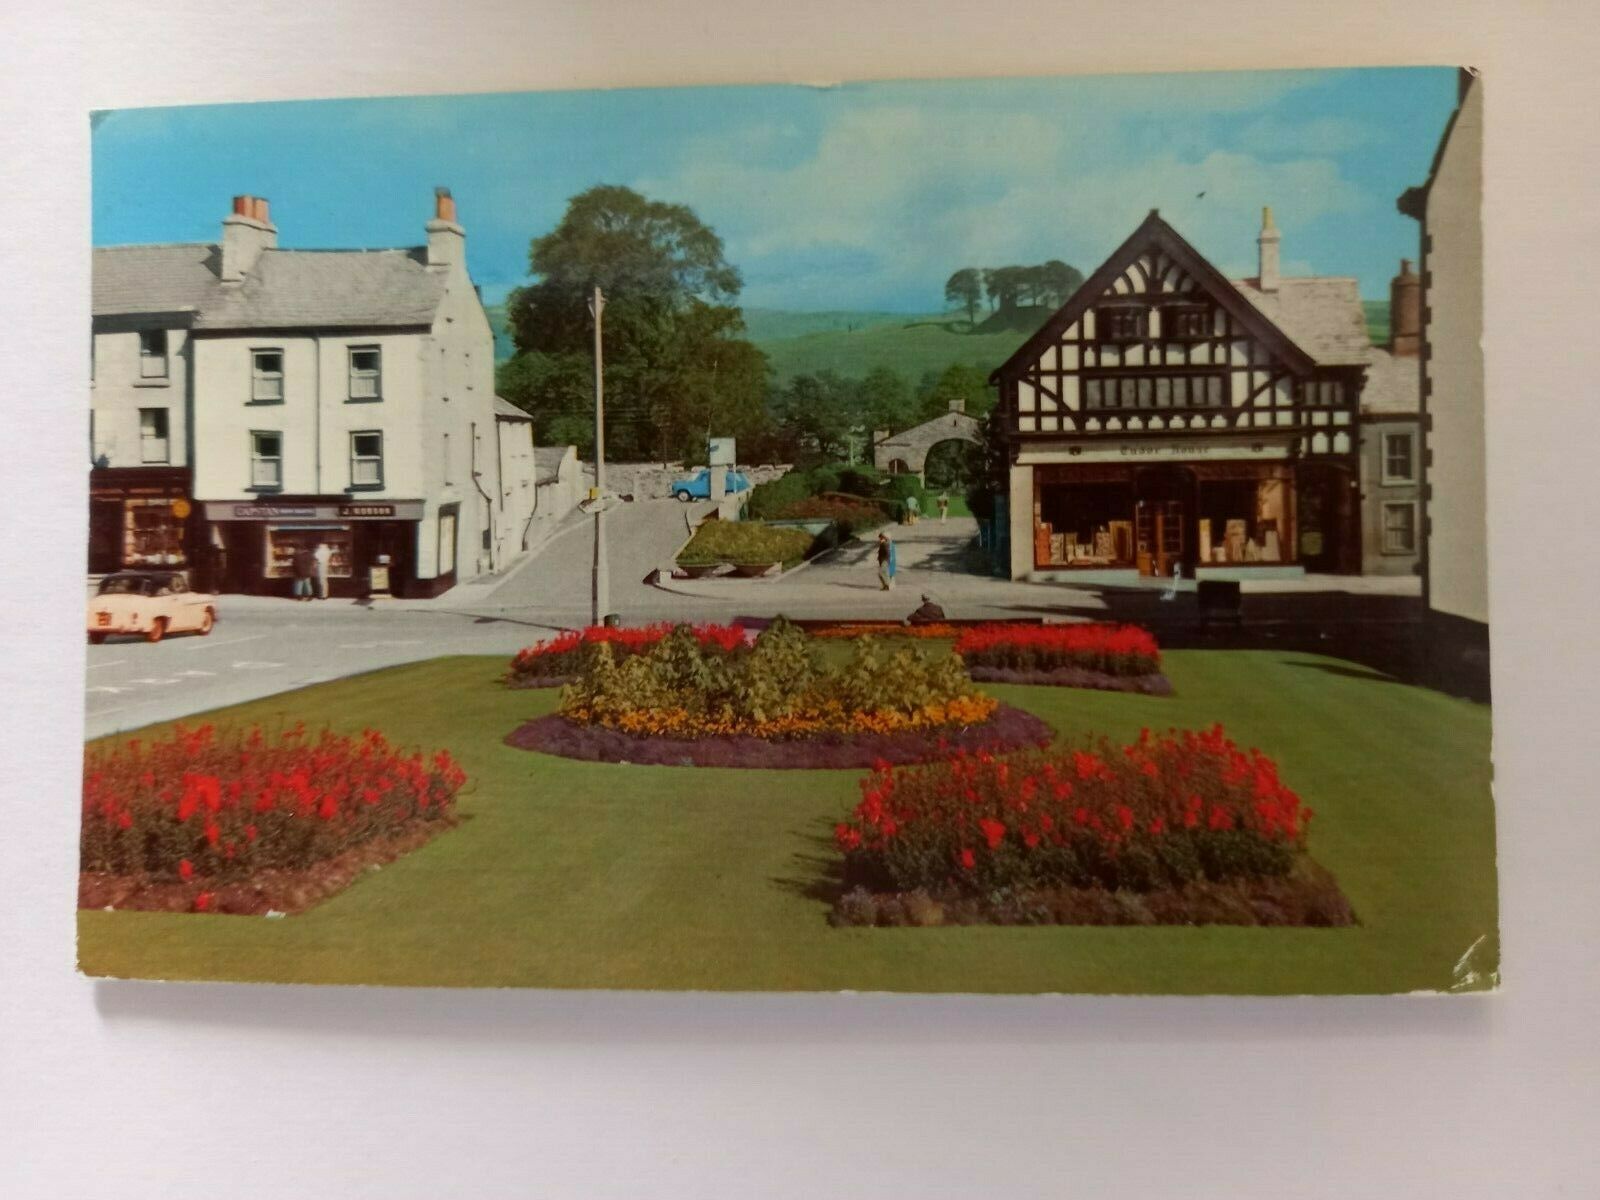 House Clearance - CUMBRIA POSTCARD KENDAL THE GARDENS GILLING GATE .